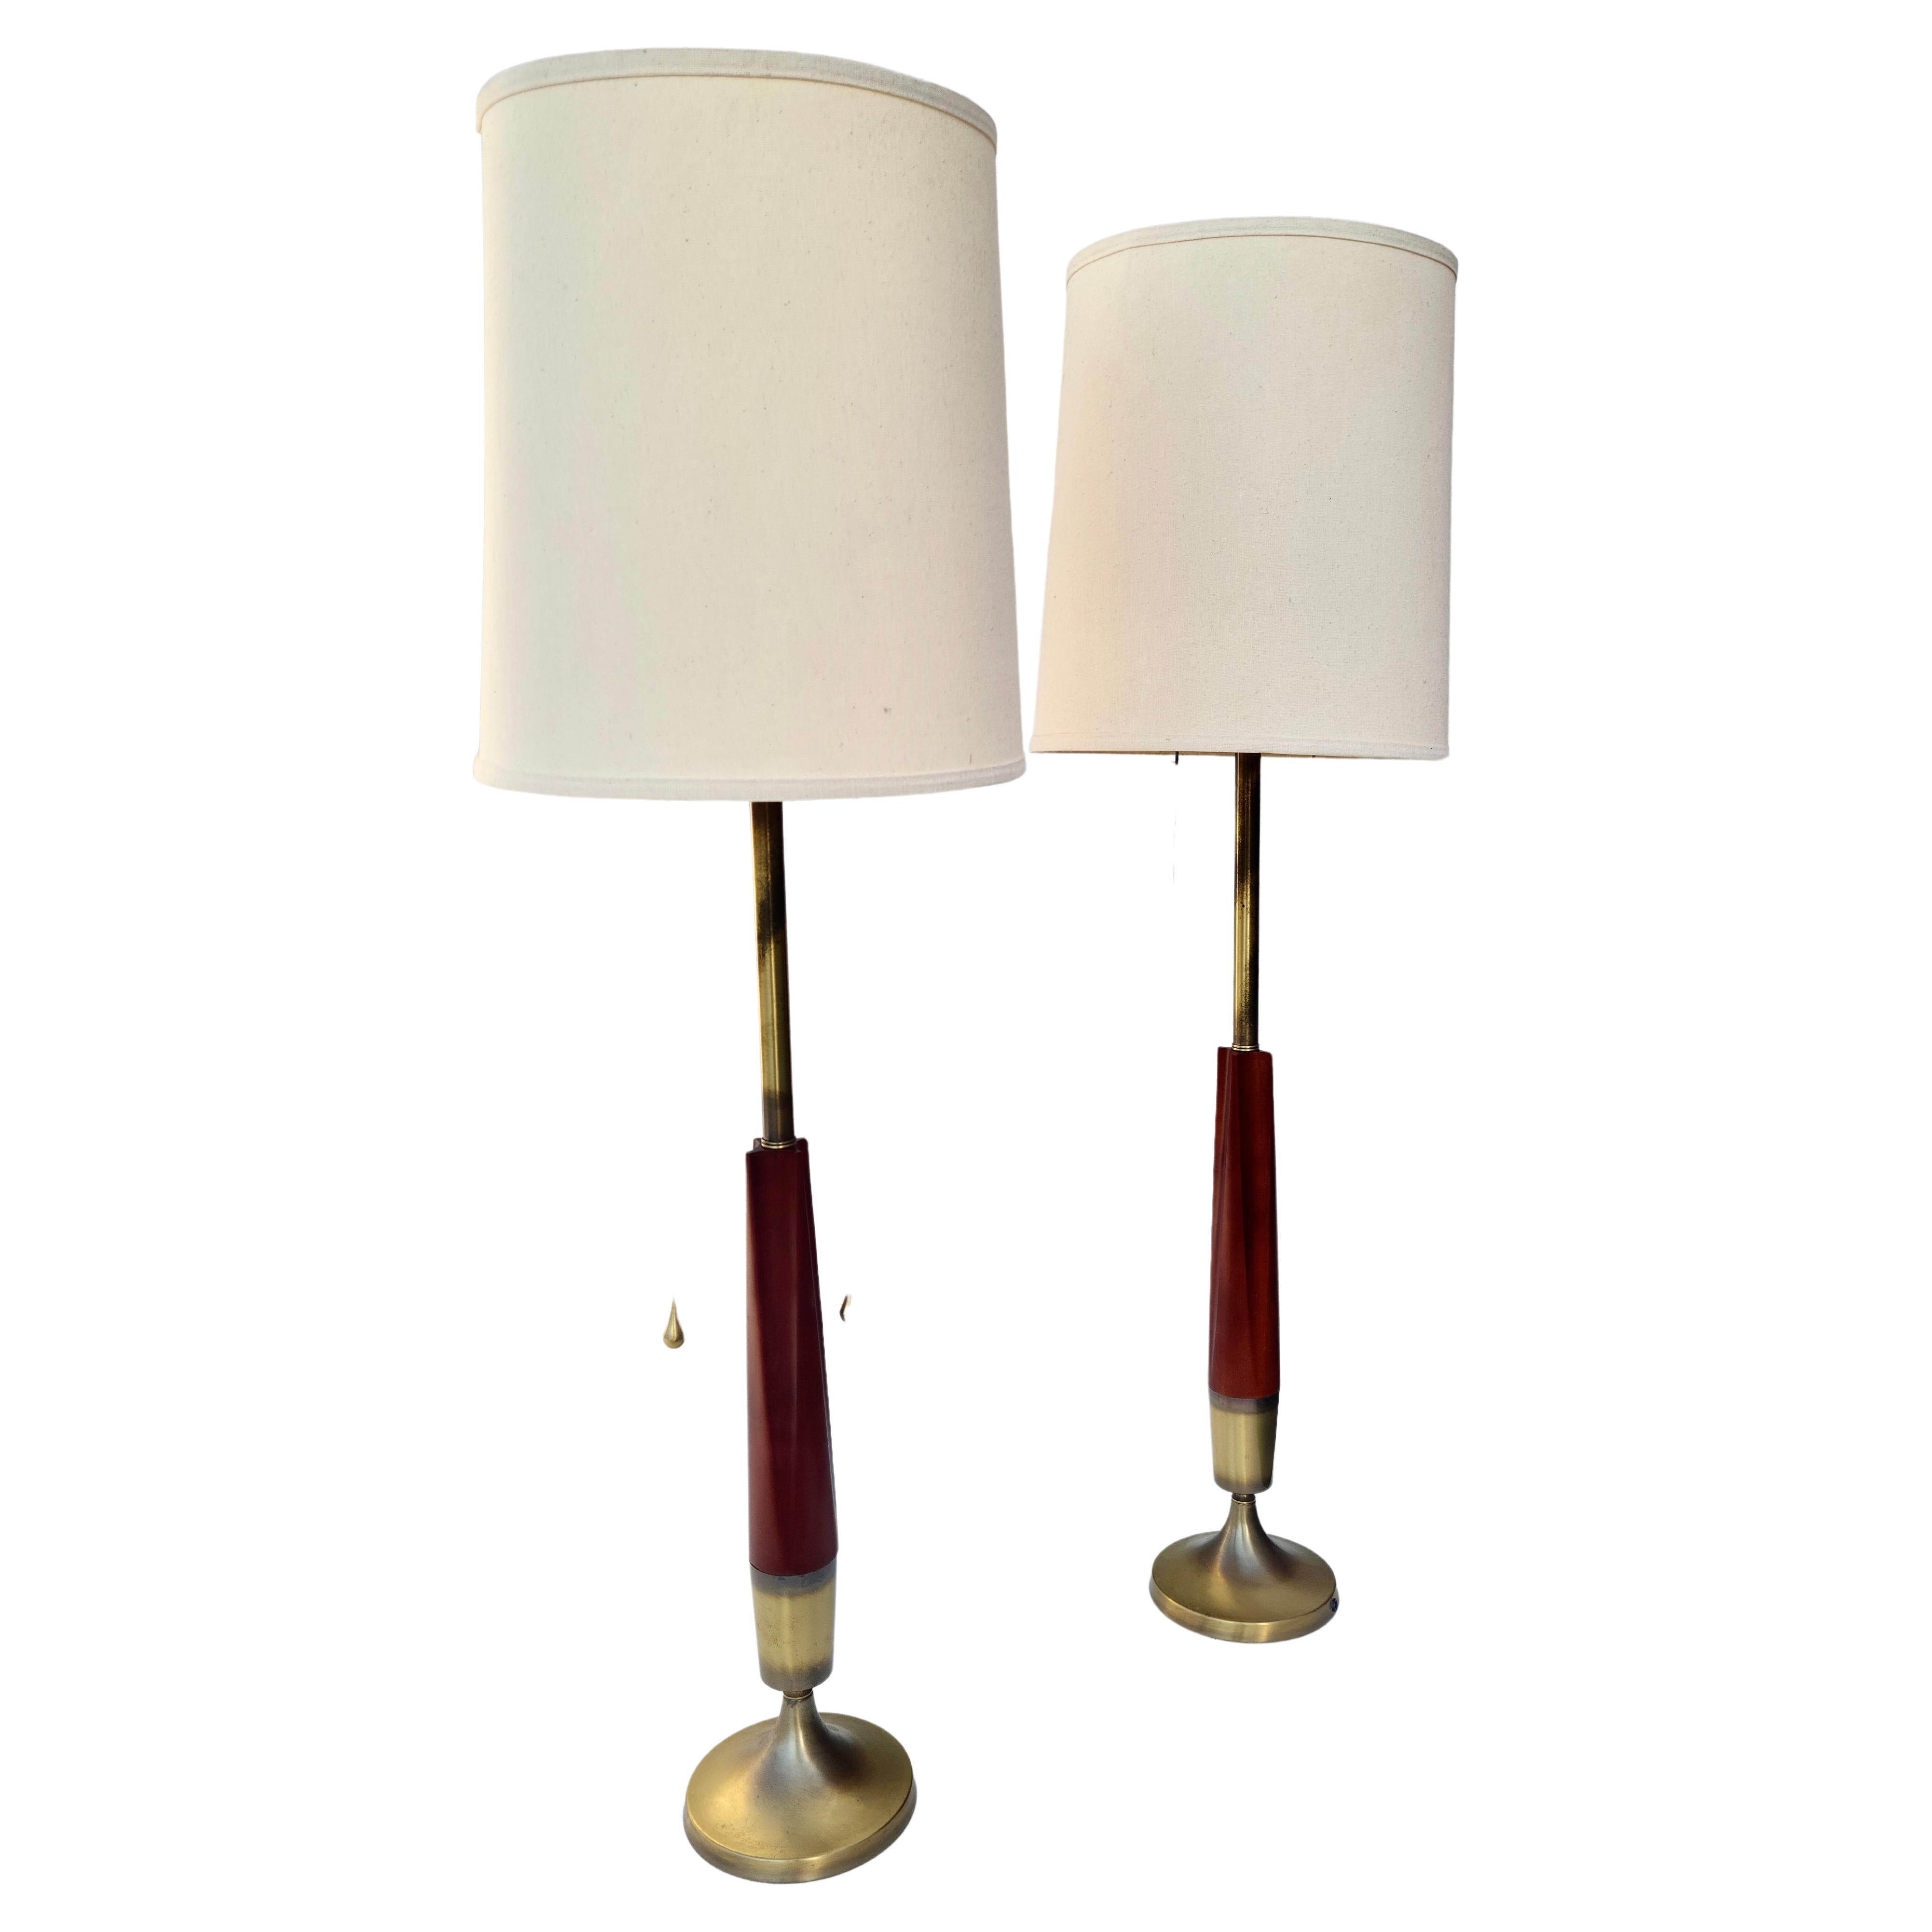 Pair Quite Large Table Lamps by Westwood Lamp Company Mid Century Modern In Good Condition For Sale In Fraser, MI